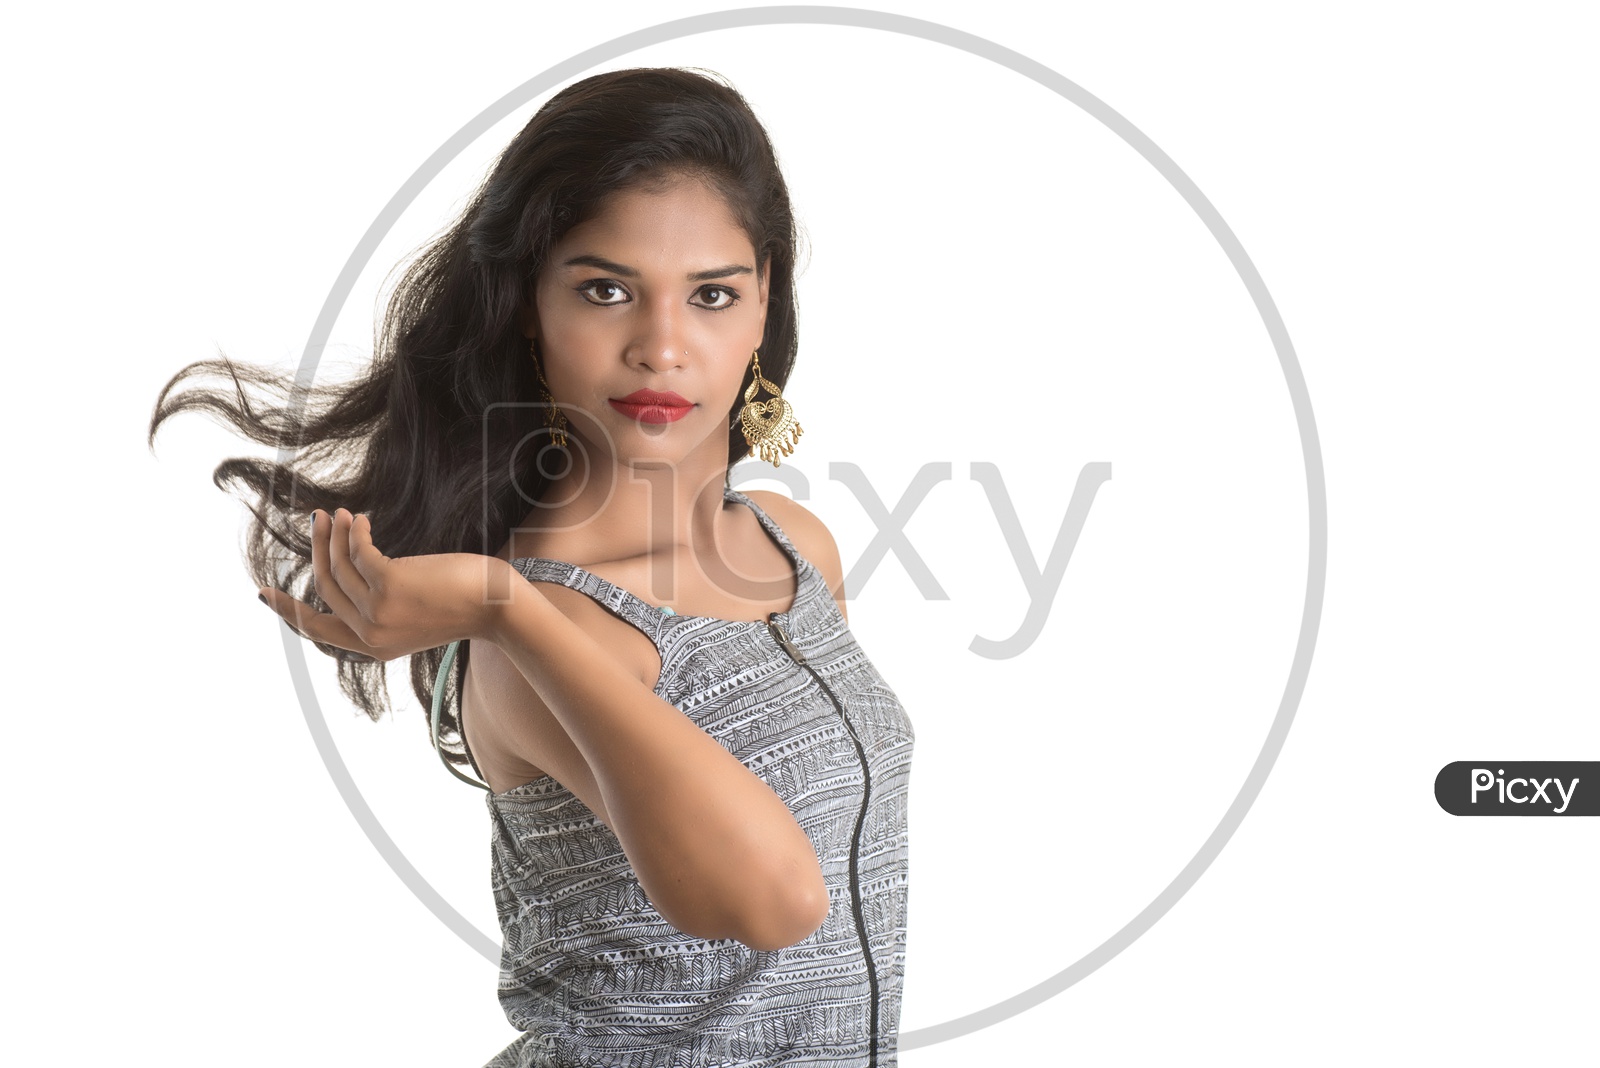 Portrait Of a Young girl Posing On an Isolated White Background